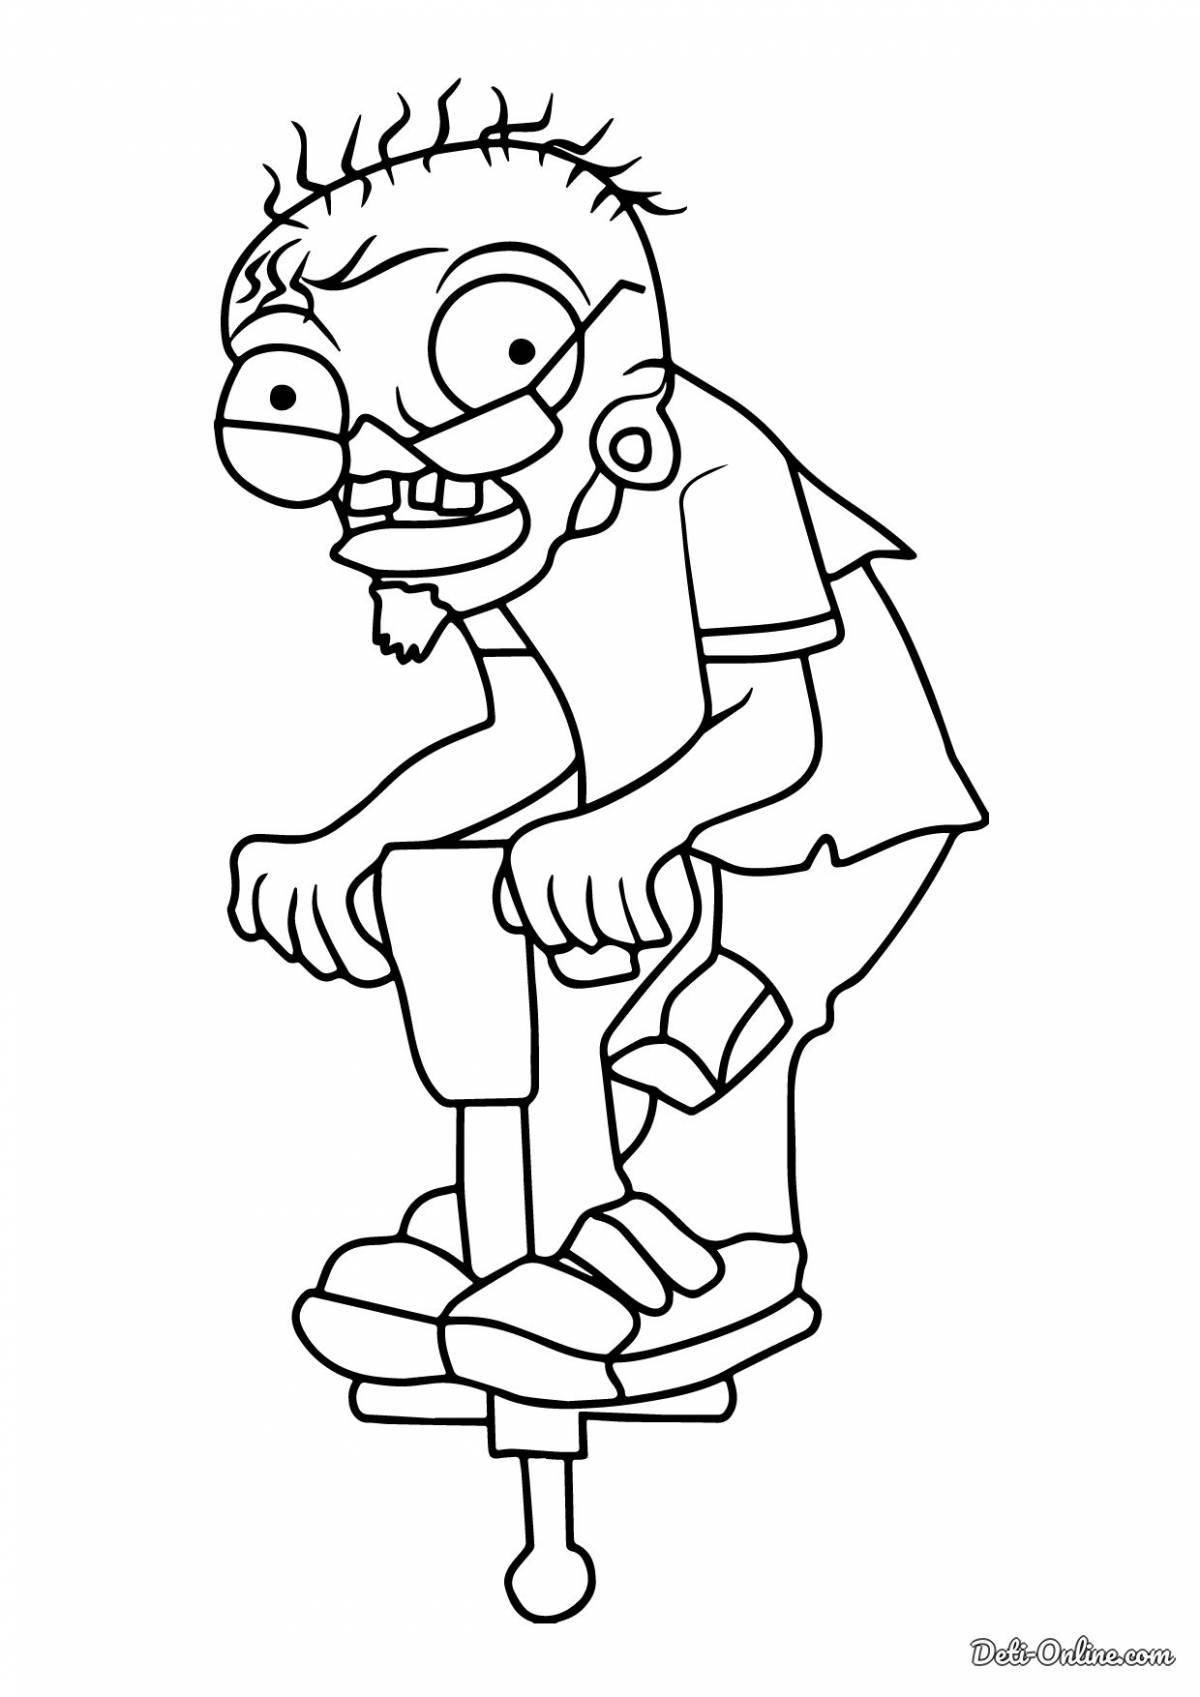 Rebel zombie coloring book for kids